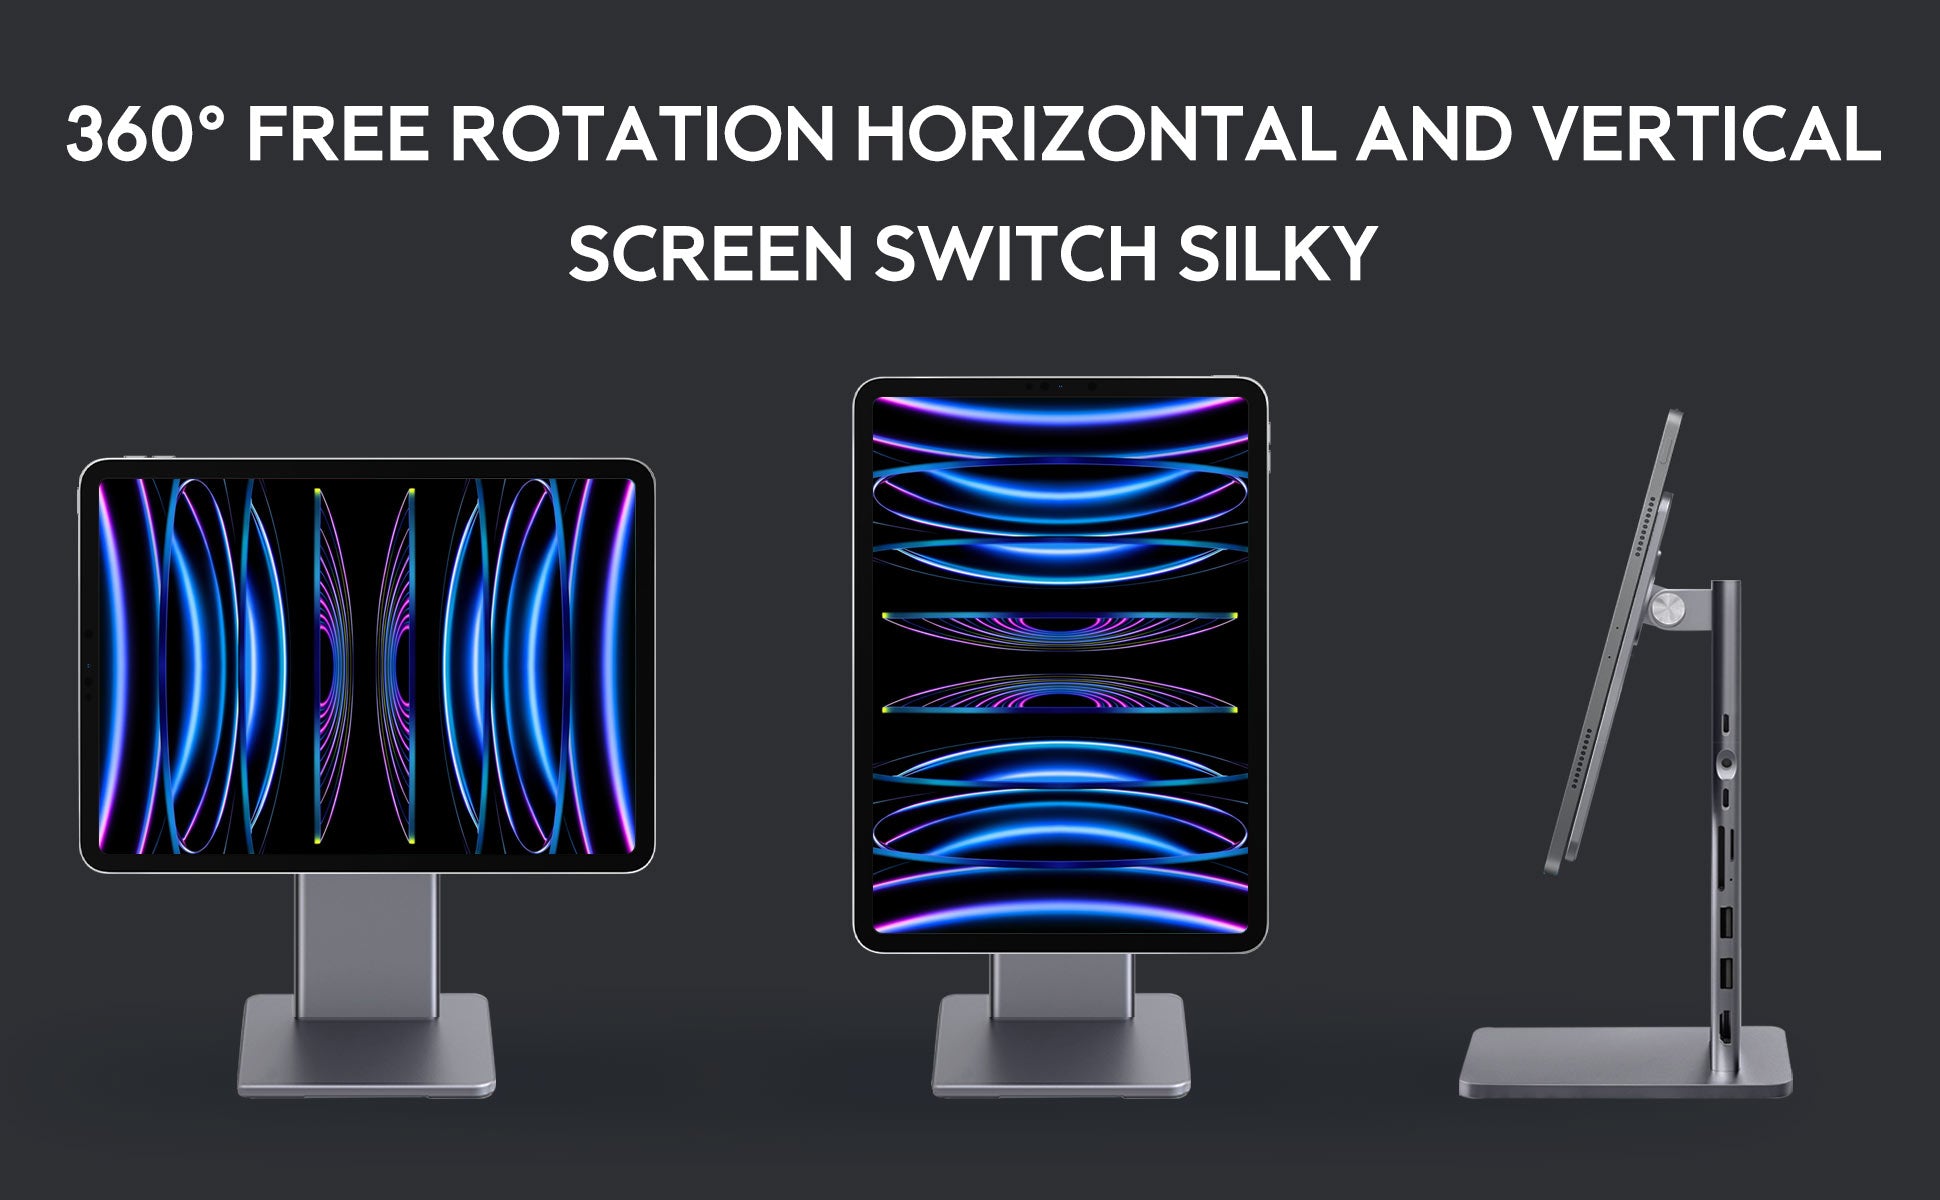 ipad-dock-stand-360°free-rotation-horizontal-and-vertical-screen